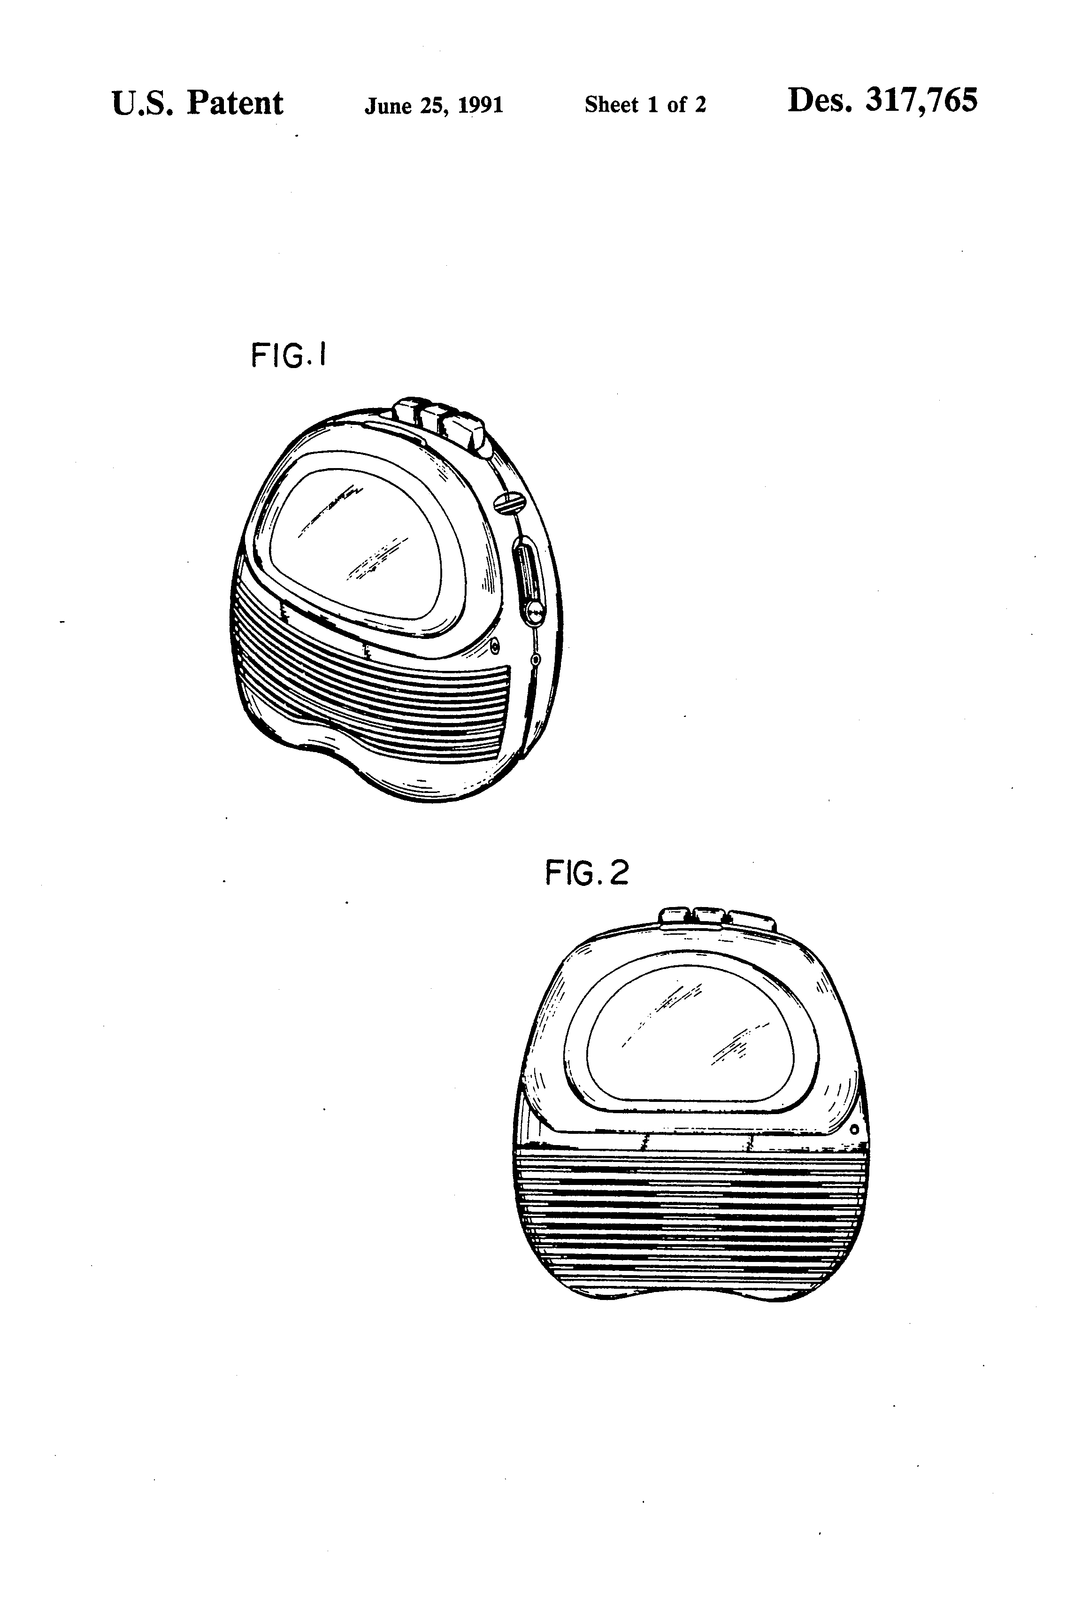 USD317765-drawings-page-2.png